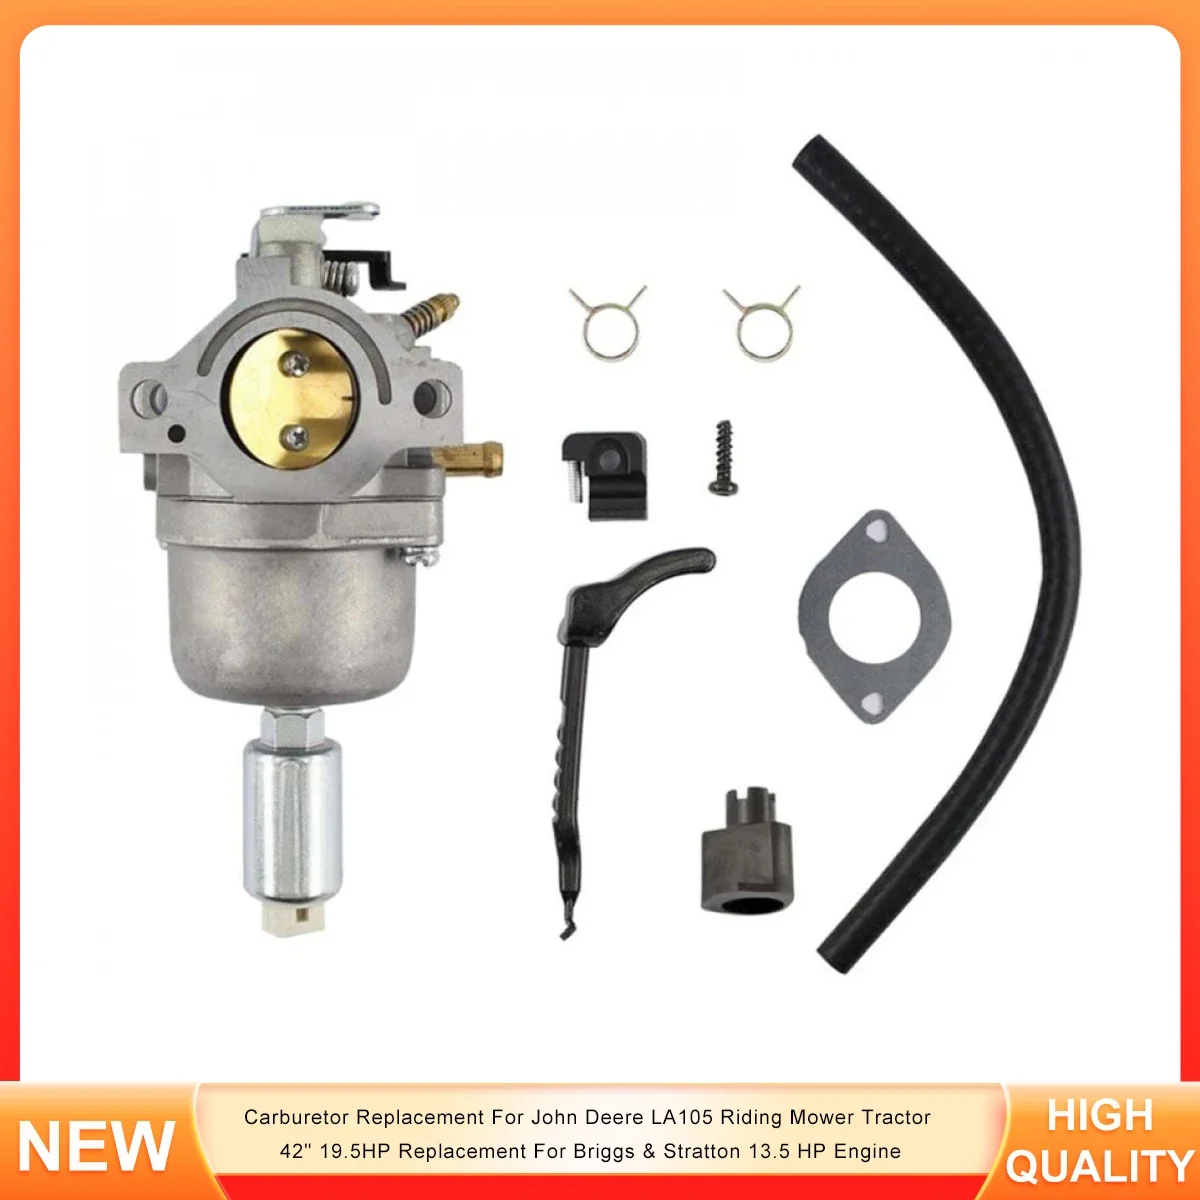 

Carburetor Replacement For John Deere LA105 Riding Mower Tractor 42" 19.5HP Replacement For Briggs & Stratton 13.5 HP Engine